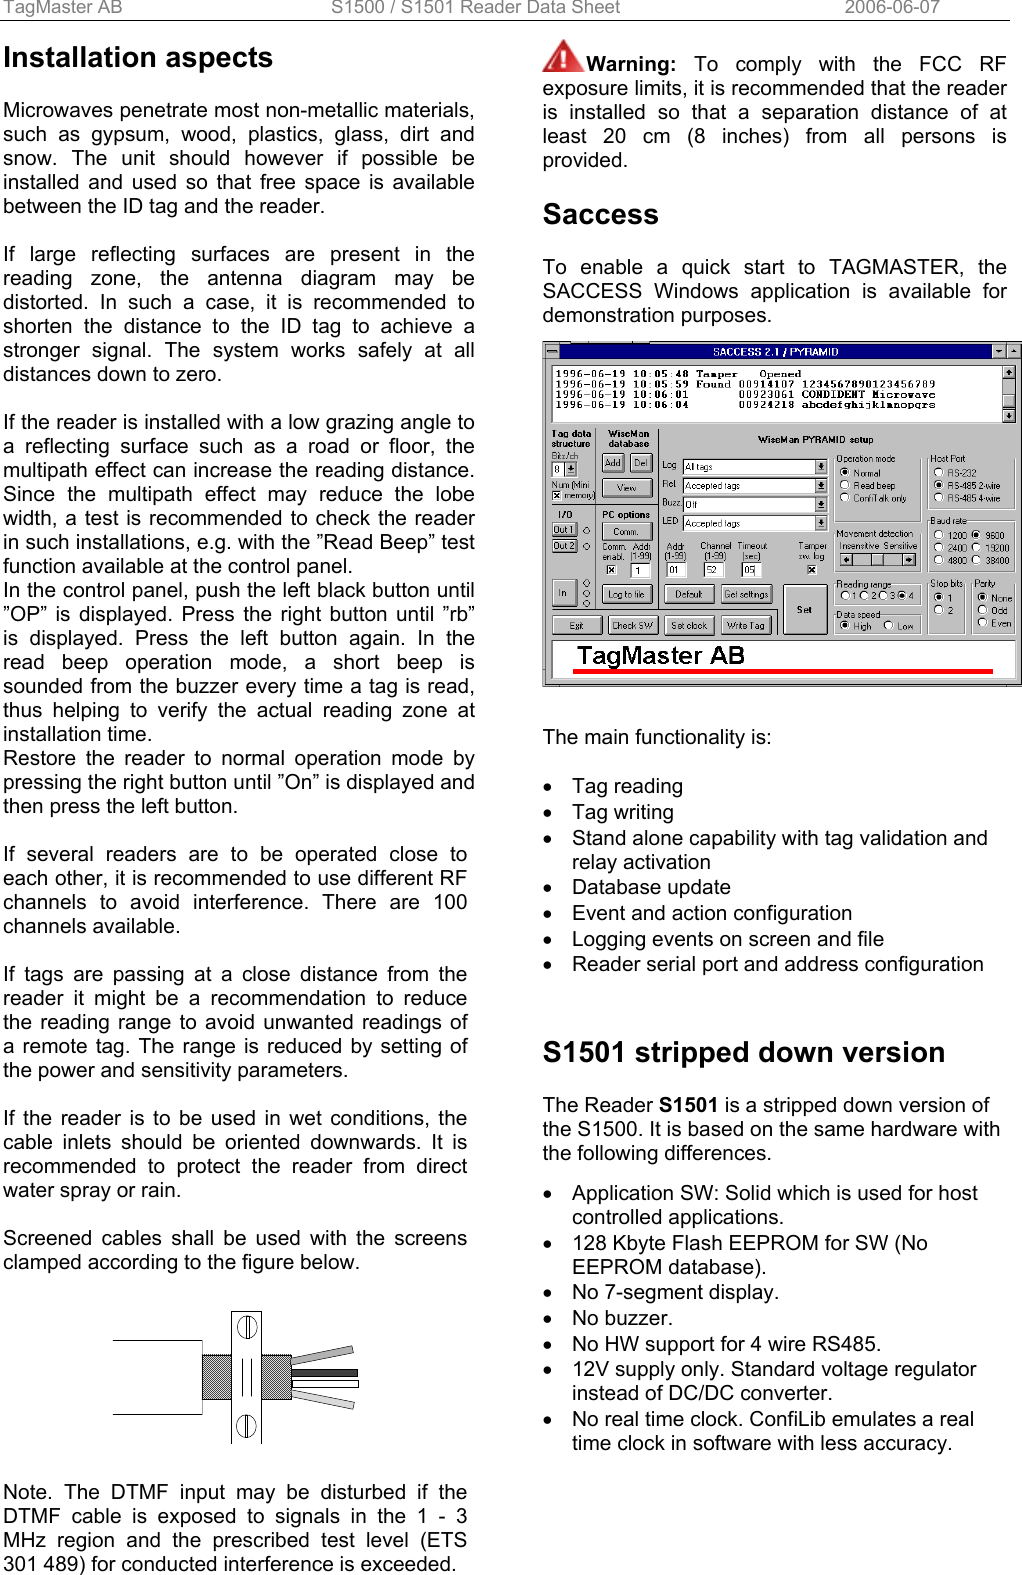 TagMaster AB  S1500 / S1501 Reader Data Sheet      2006-06-07 Installation aspects  Microwaves penetrate most non-metallic materials, such as gypsum, wood, plastics, glass, dirt and snow. The unit should however if possible be installed and used so that free space is available between the ID tag and the reader.  If large reflecting surfaces are present in the reading zone, the antenna diagram may be distorted. In such a case, it is recommended to shorten the distance to the ID tag to achieve a stronger signal. The system works safely at all distances down to zero.  If the reader is installed with a low grazing angle to a reflecting surface such as a road or floor, the multipath effect can increase the reading distance. Since the multipath effect may reduce the lobe width, a test is recommended to check the reader in such installations, e.g. with the ”Read Beep” test function available at the control panel. In the control panel, push the left black button until ”OP” is displayed. Press the right button until ”rb” is displayed. Press the left button again. In the read beep operation mode, a short beep is sounded from the buzzer every time a tag is read, thus helping to verify the actual reading zone at installation time. Restore the reader to normal operation mode by pressing the right button until ”On” is displayed and then press the left button.  If several readers are to be operated close to each other, it is recommended to use different RF channels to avoid interference. There are 100 channels available.  If tags are passing at a close distance from the reader it might be a recommendation to reduce the reading range to avoid unwanted readings of a remote tag. The range is reduced by setting of the power and sensitivity parameters.  If the reader is to be used in wet conditions, the cable inlets should be oriented downwards. It is recommended to protect the reader from direct water spray or rain.  Screened cables shall be used with the screens clamped according to the figure below.    Note. The DTMF input may be disturbed if the DTMF cable is exposed to signals in the 1 - 3 MHz region and the prescribed test level (ETS 301 489) for conducted interference is exceeded.  Warning:  To comply with the FCC RF exposure limits, it is recommended that the reader is installed so that a separation distance of at least 20 cm (8 inches) from all persons is provided.  Saccess  To enable a quick start to TAGMASTER, the SACCESS Windows application is available for demonstration purposes.     The main functionality is:  • Tag reading • Tag writing •  Stand alone capability with tag validation and relay activation • Database update •  Event and action configuration •  Logging events on screen and file •  Reader serial port and address configuration   S1501 stripped down version  The Reader S1501 is a stripped down version of the S1500. It is based on the same hardware with the following differences.  •  Application SW: Solid which is used for host controlled applications. •  128 Kbyte Flash EEPROM for SW (No EEPROM database). •  No 7-segment display. • No buzzer. •  No HW support for 4 wire RS485. •  12V supply only. Standard voltage regulator instead of DC/DC converter. •  No real time clock. ConfiLib emulates a real time clock in software with less accuracy.                        